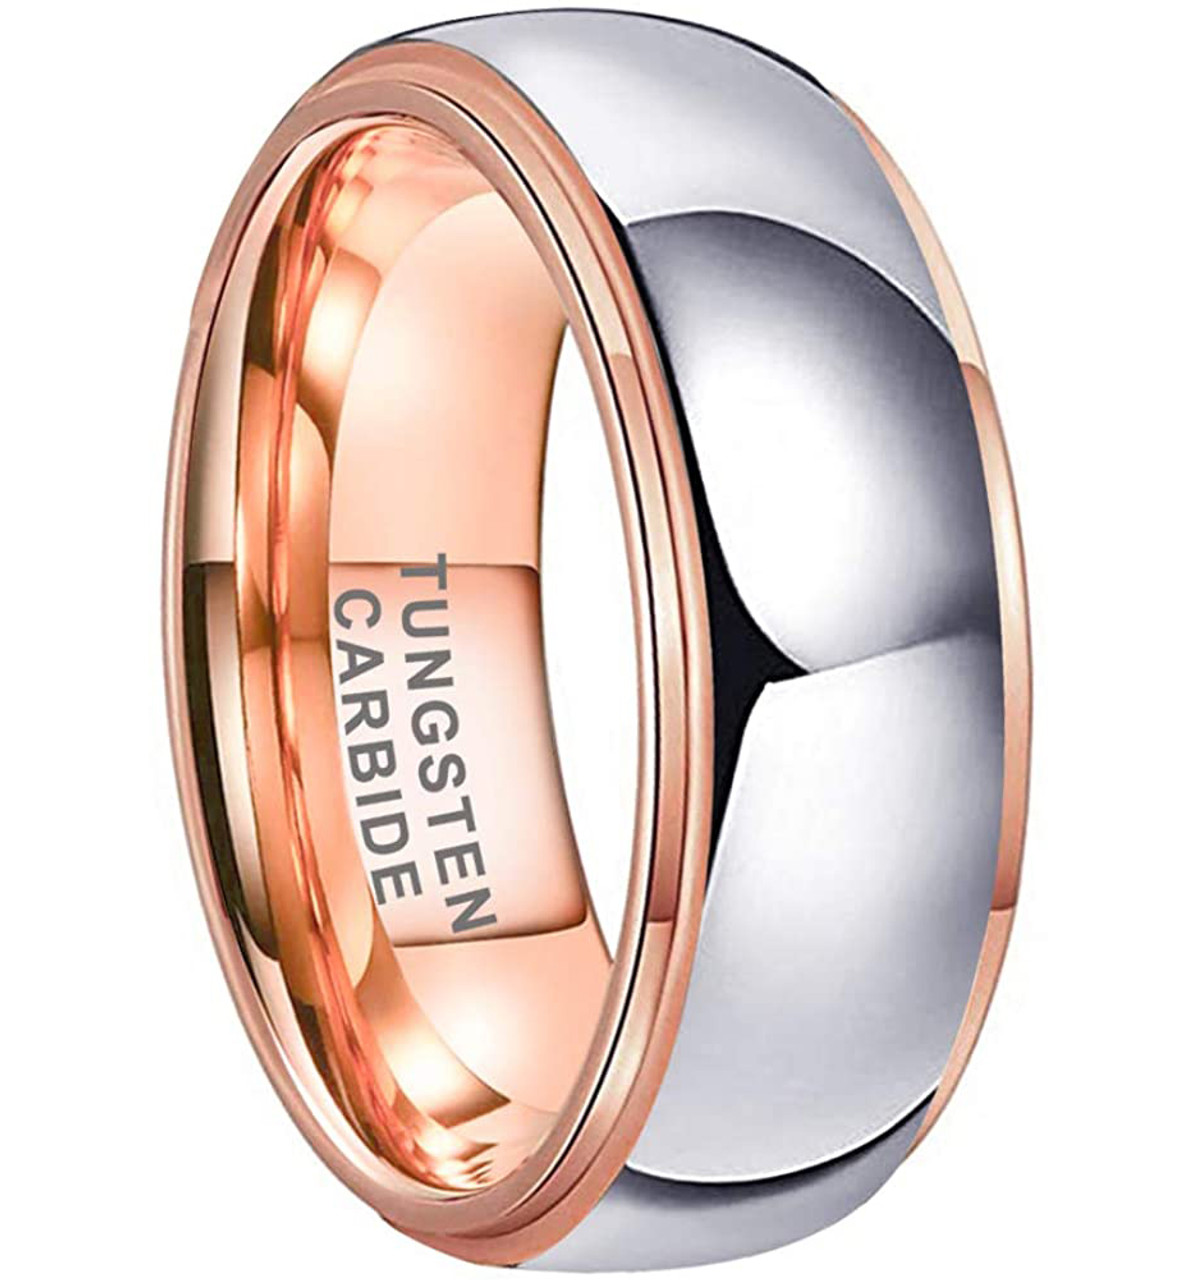 (8mm) Unisex or Men's Rose Gold and Silver Dome Gunmetal Tungsten Carbide Wedding Ring Band